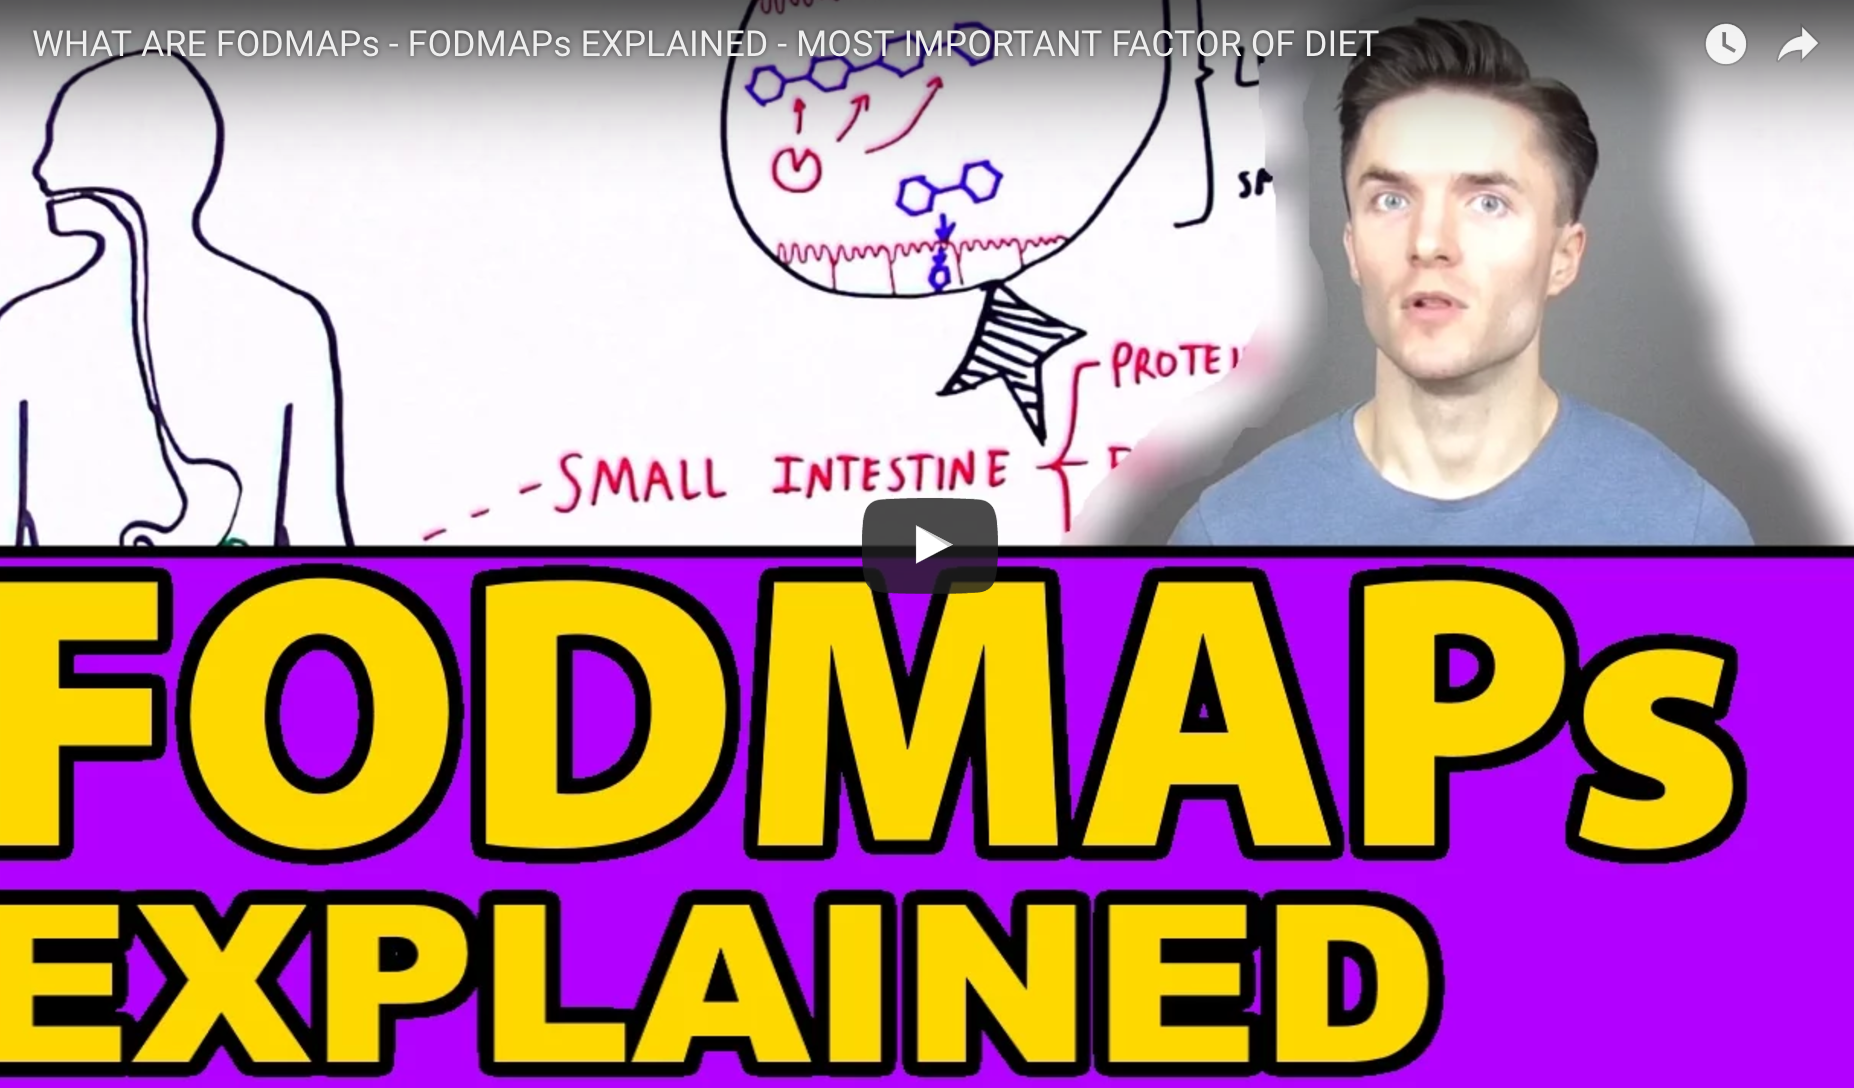 FODMAPs Explained – The Most Important Factor In Our Diet